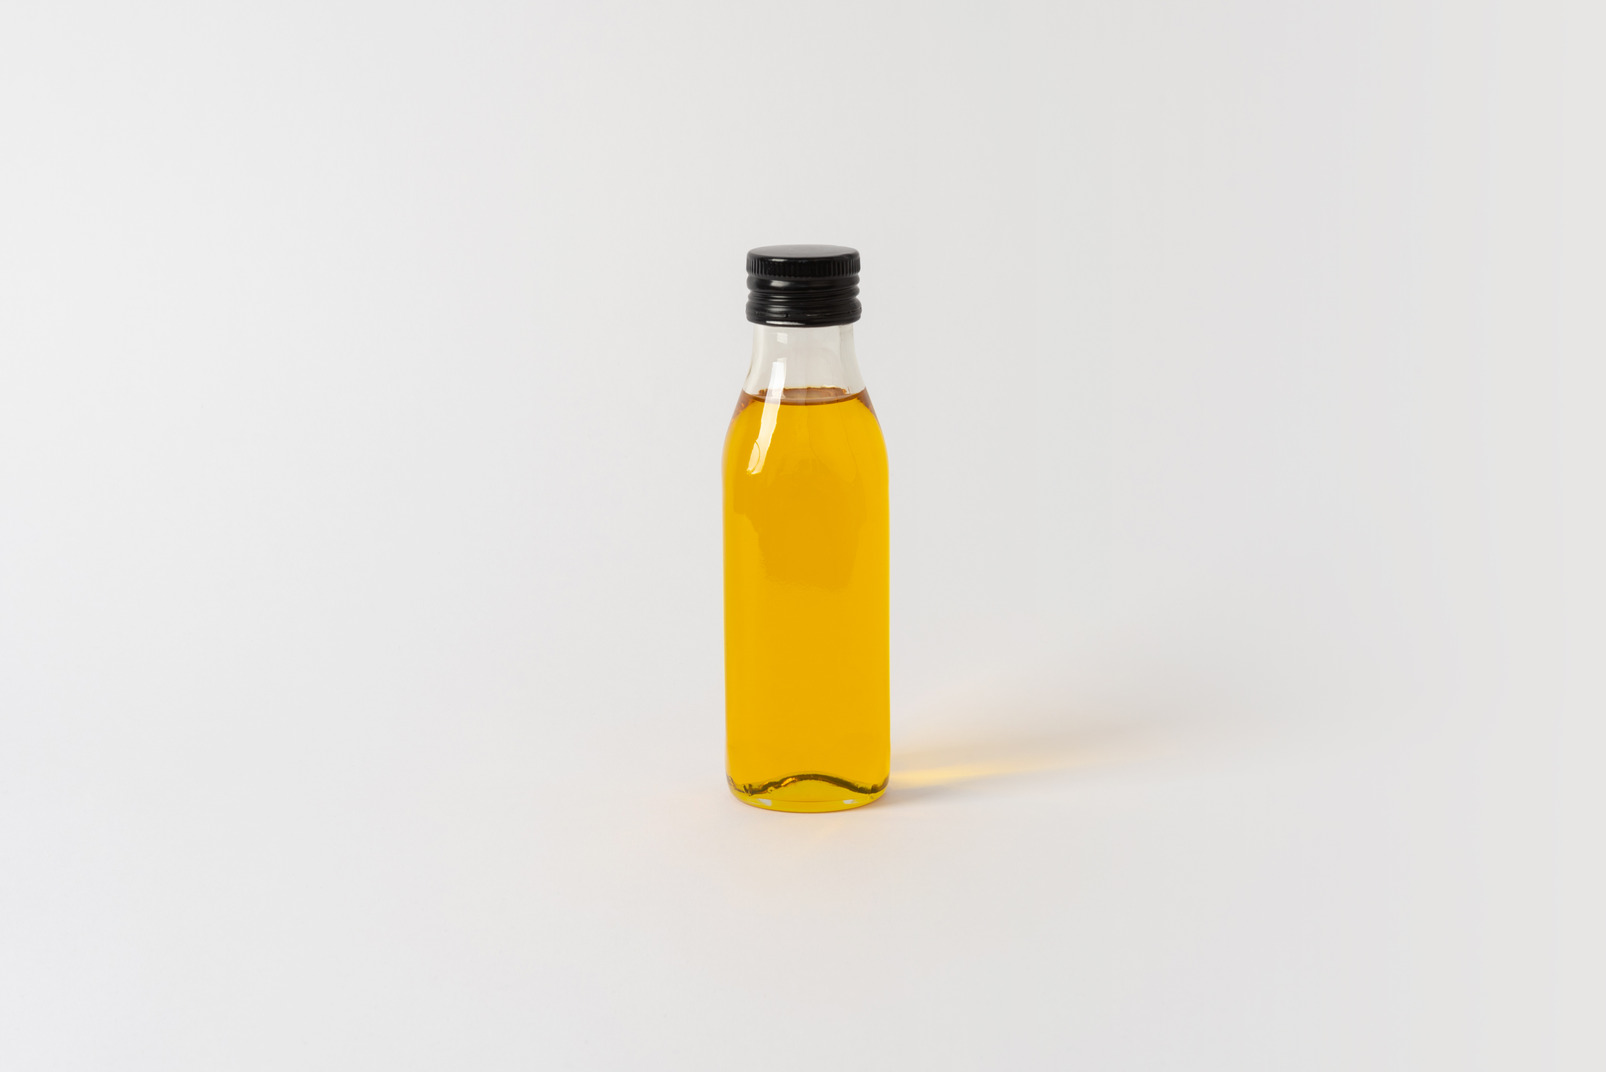 Some vegetable oil in a bottle